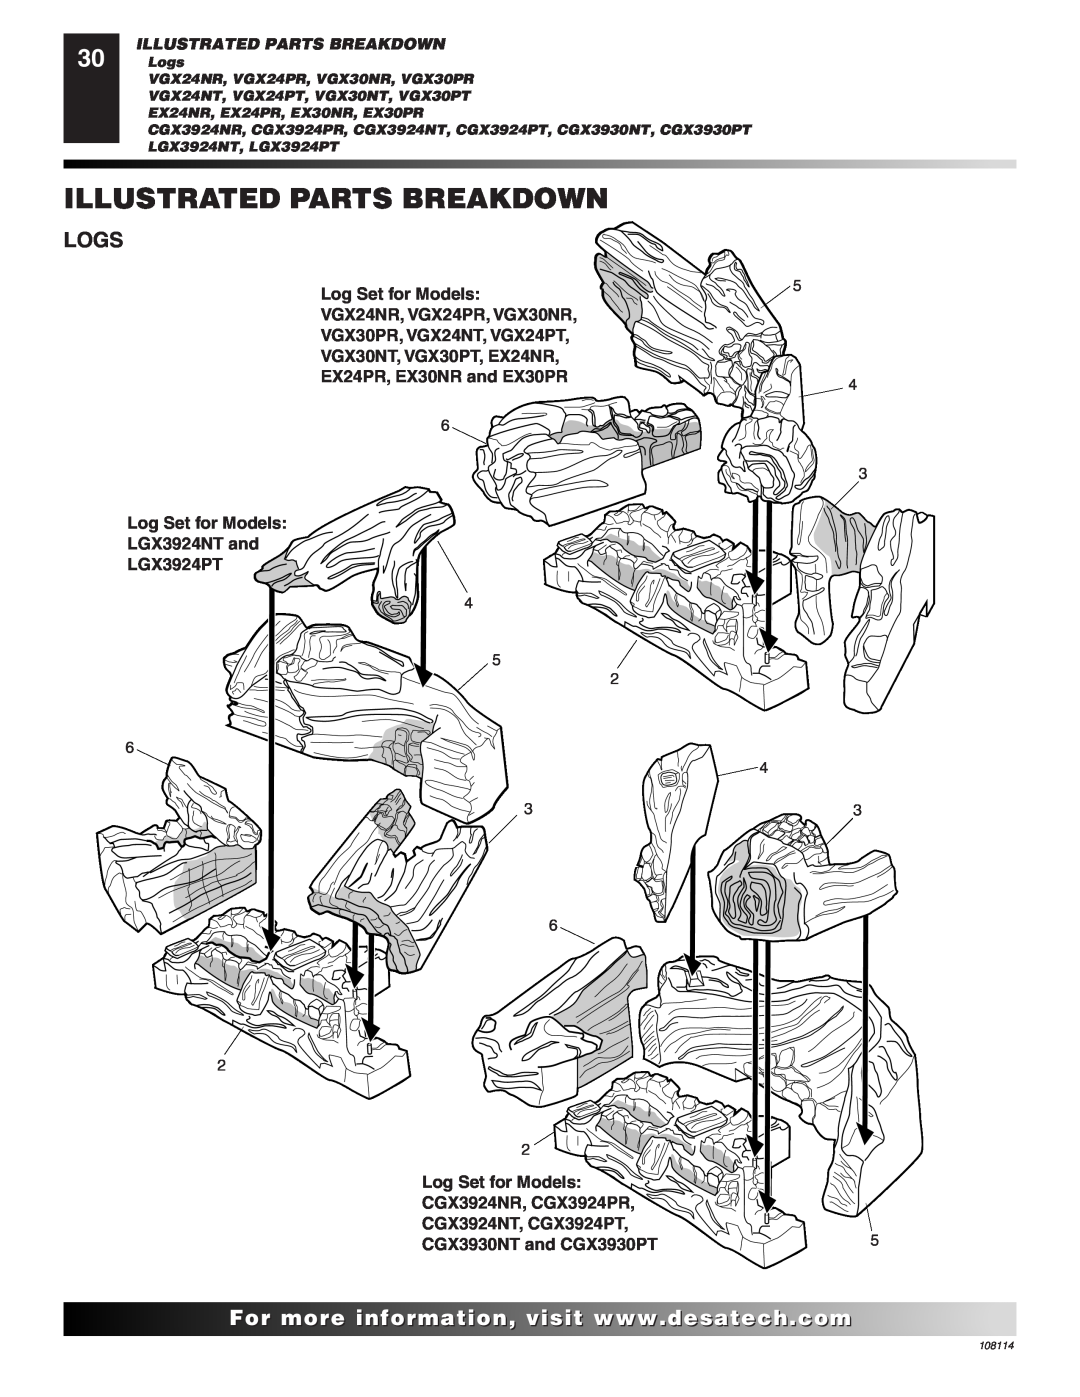 Desa INTERNATIONAL UNVENTED (VENT-FREE) GAS LOG HEATER installation manual Illustrated Parts Breakdown 